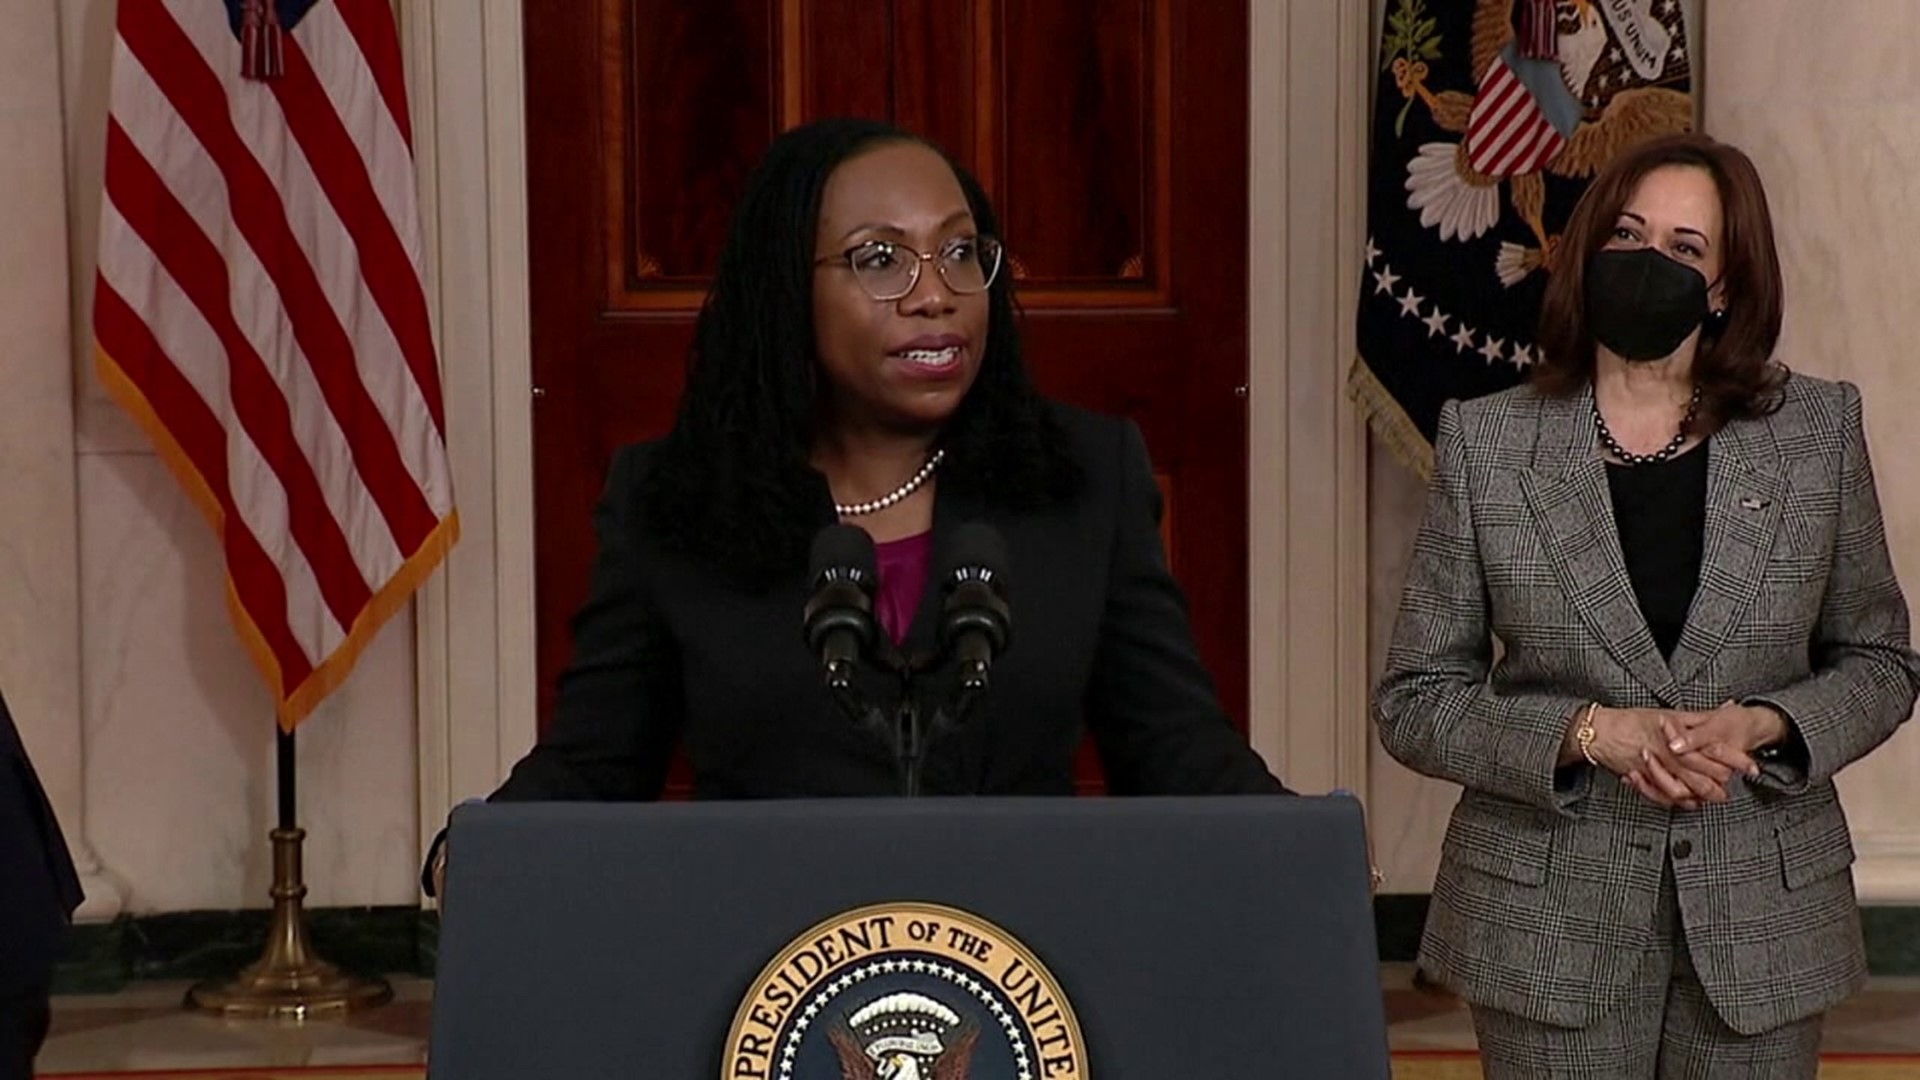 Judge Ketanji Brown Jackson is President Biden's nominee to be the next U.S. Supreme Court Justice; the first black woman nominated for the nation's high court.